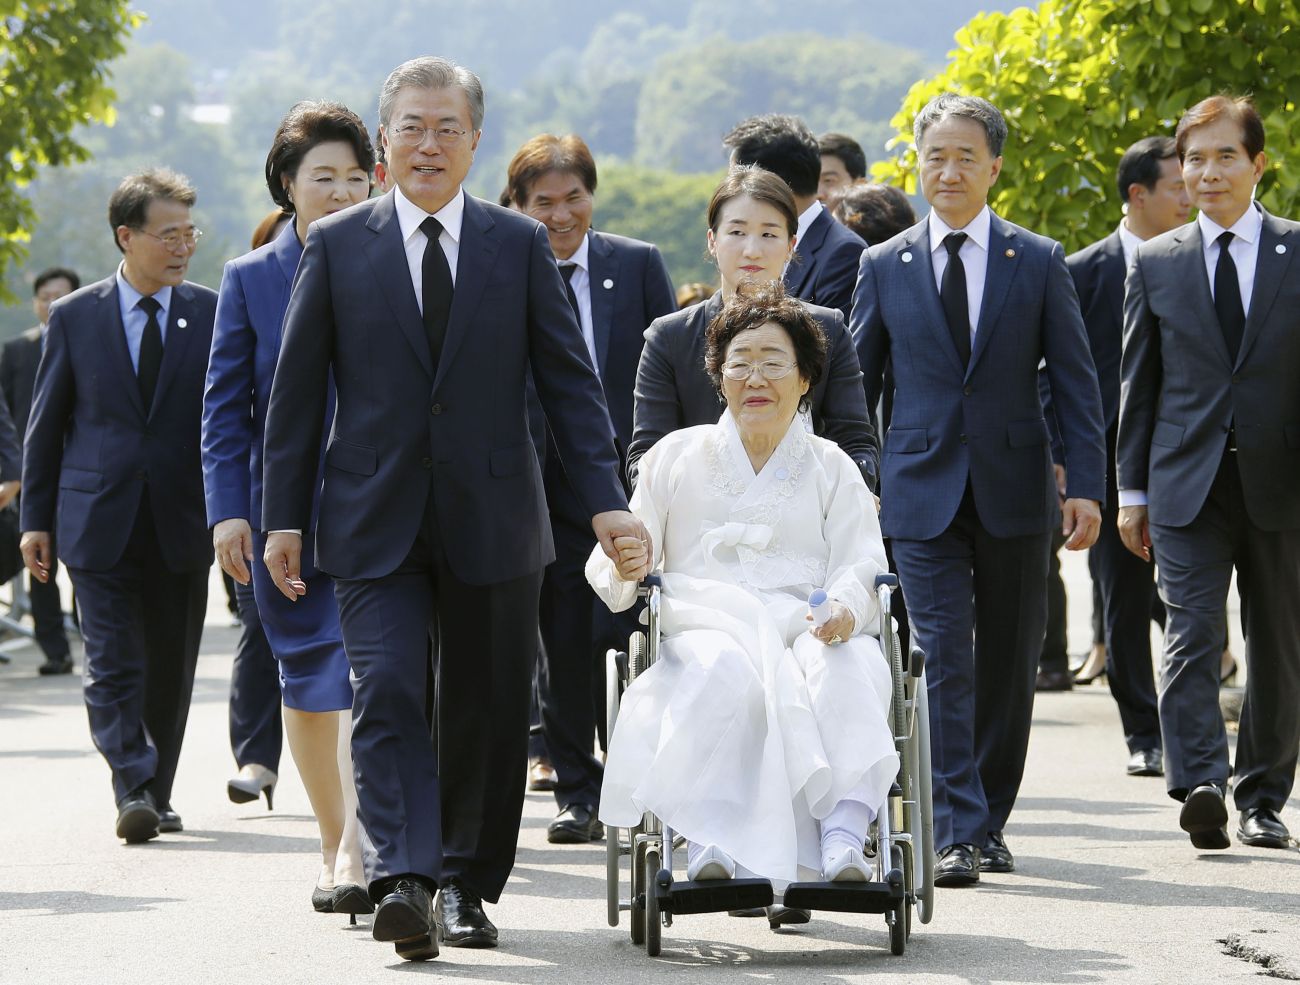 EDITORIAL: Japan-South Korea Relations Take A Step Backward with Comfort Women Memorial Day